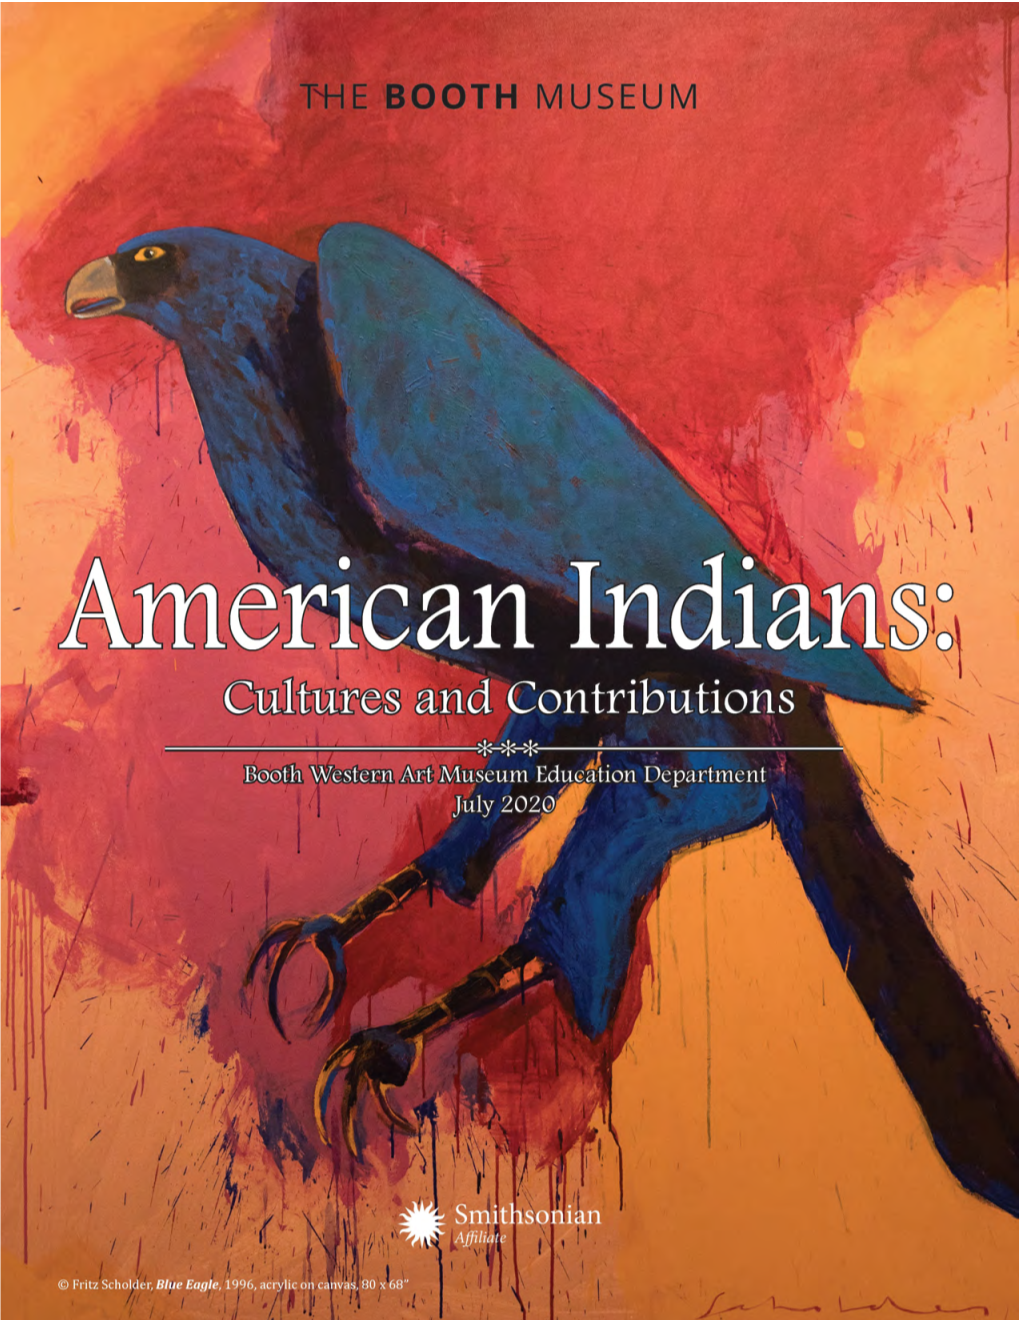 To View the American Indians Program Guide